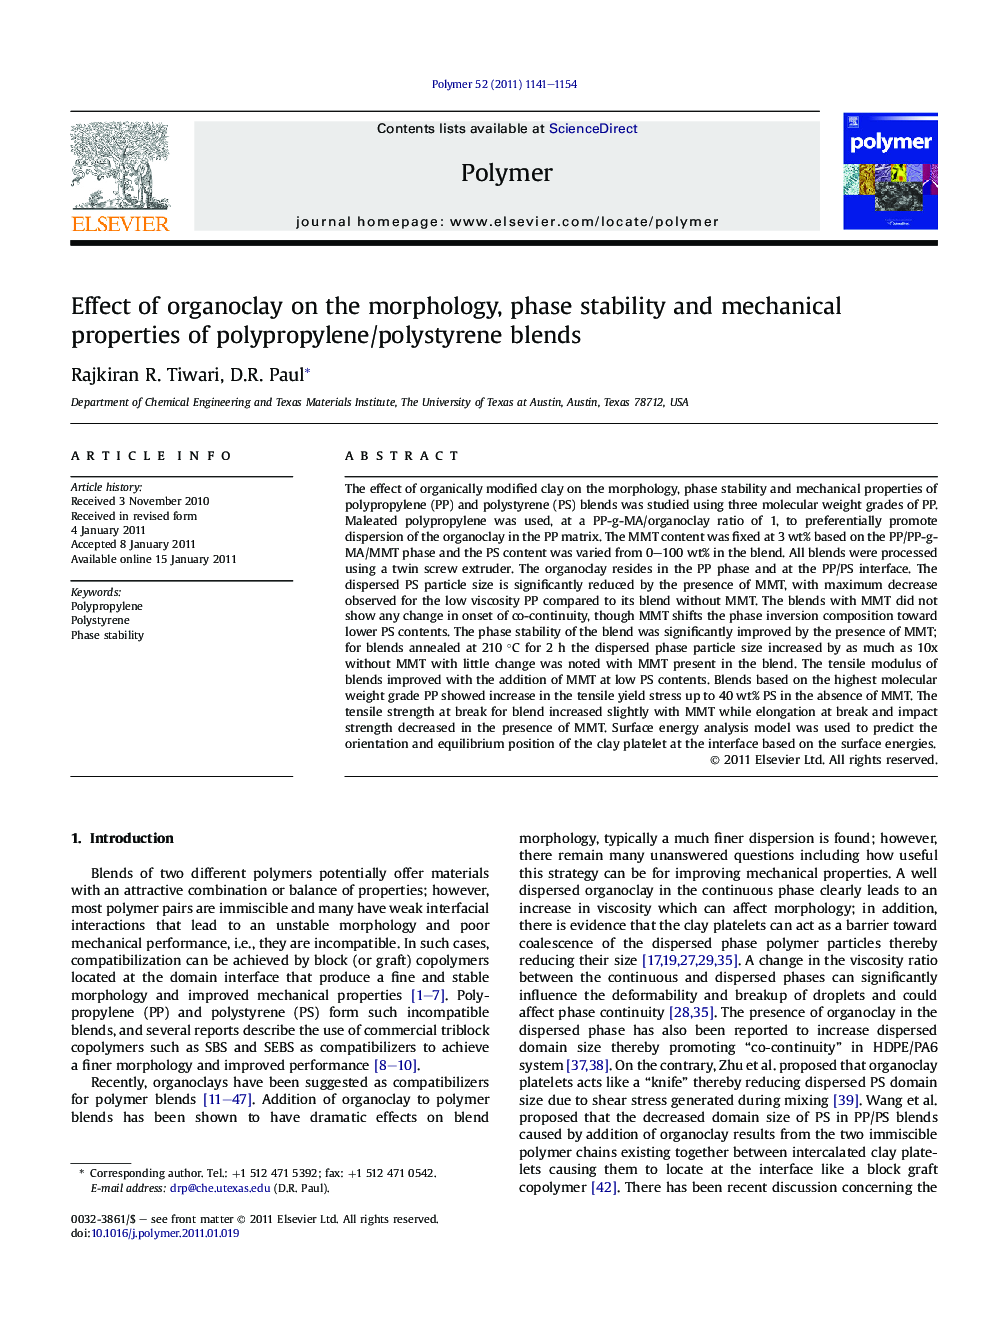 Effect of organoclay on the morphology, phase stability and mechanical properties of polypropylene/polystyrene blends